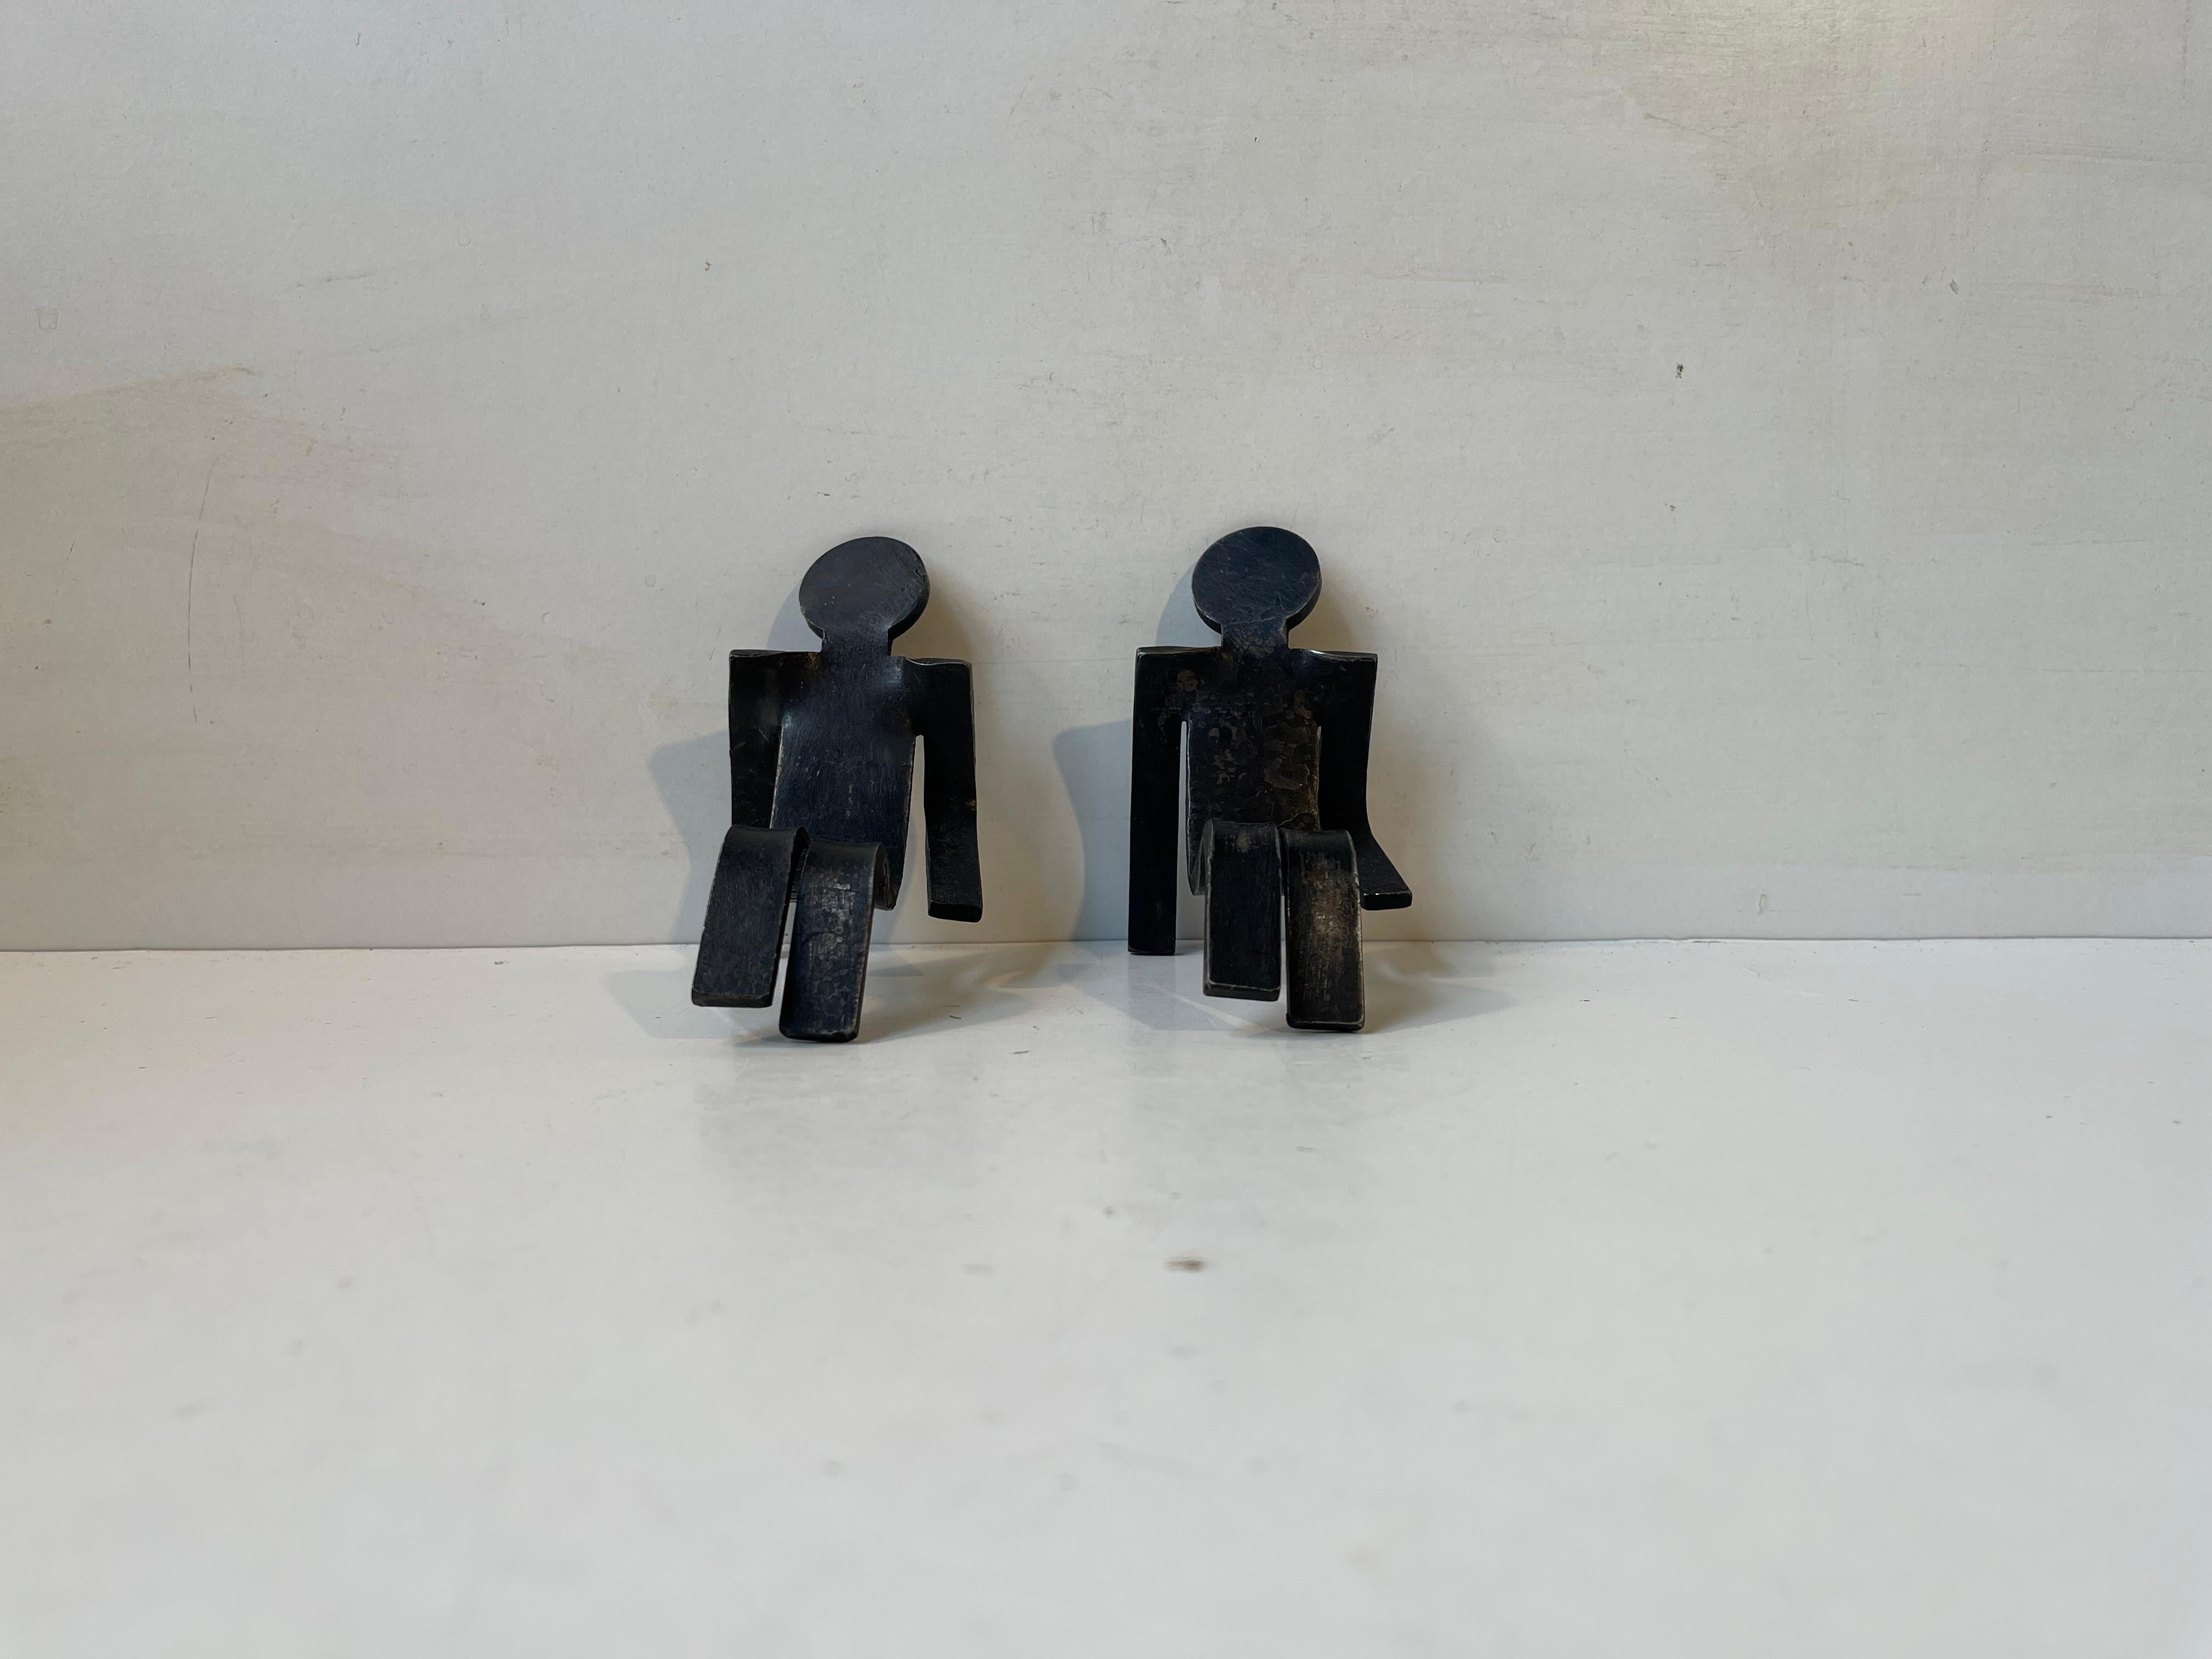 Danish Memphis Style Figural Bookends in Bend Steel, 1980s, set of 2 For Sale